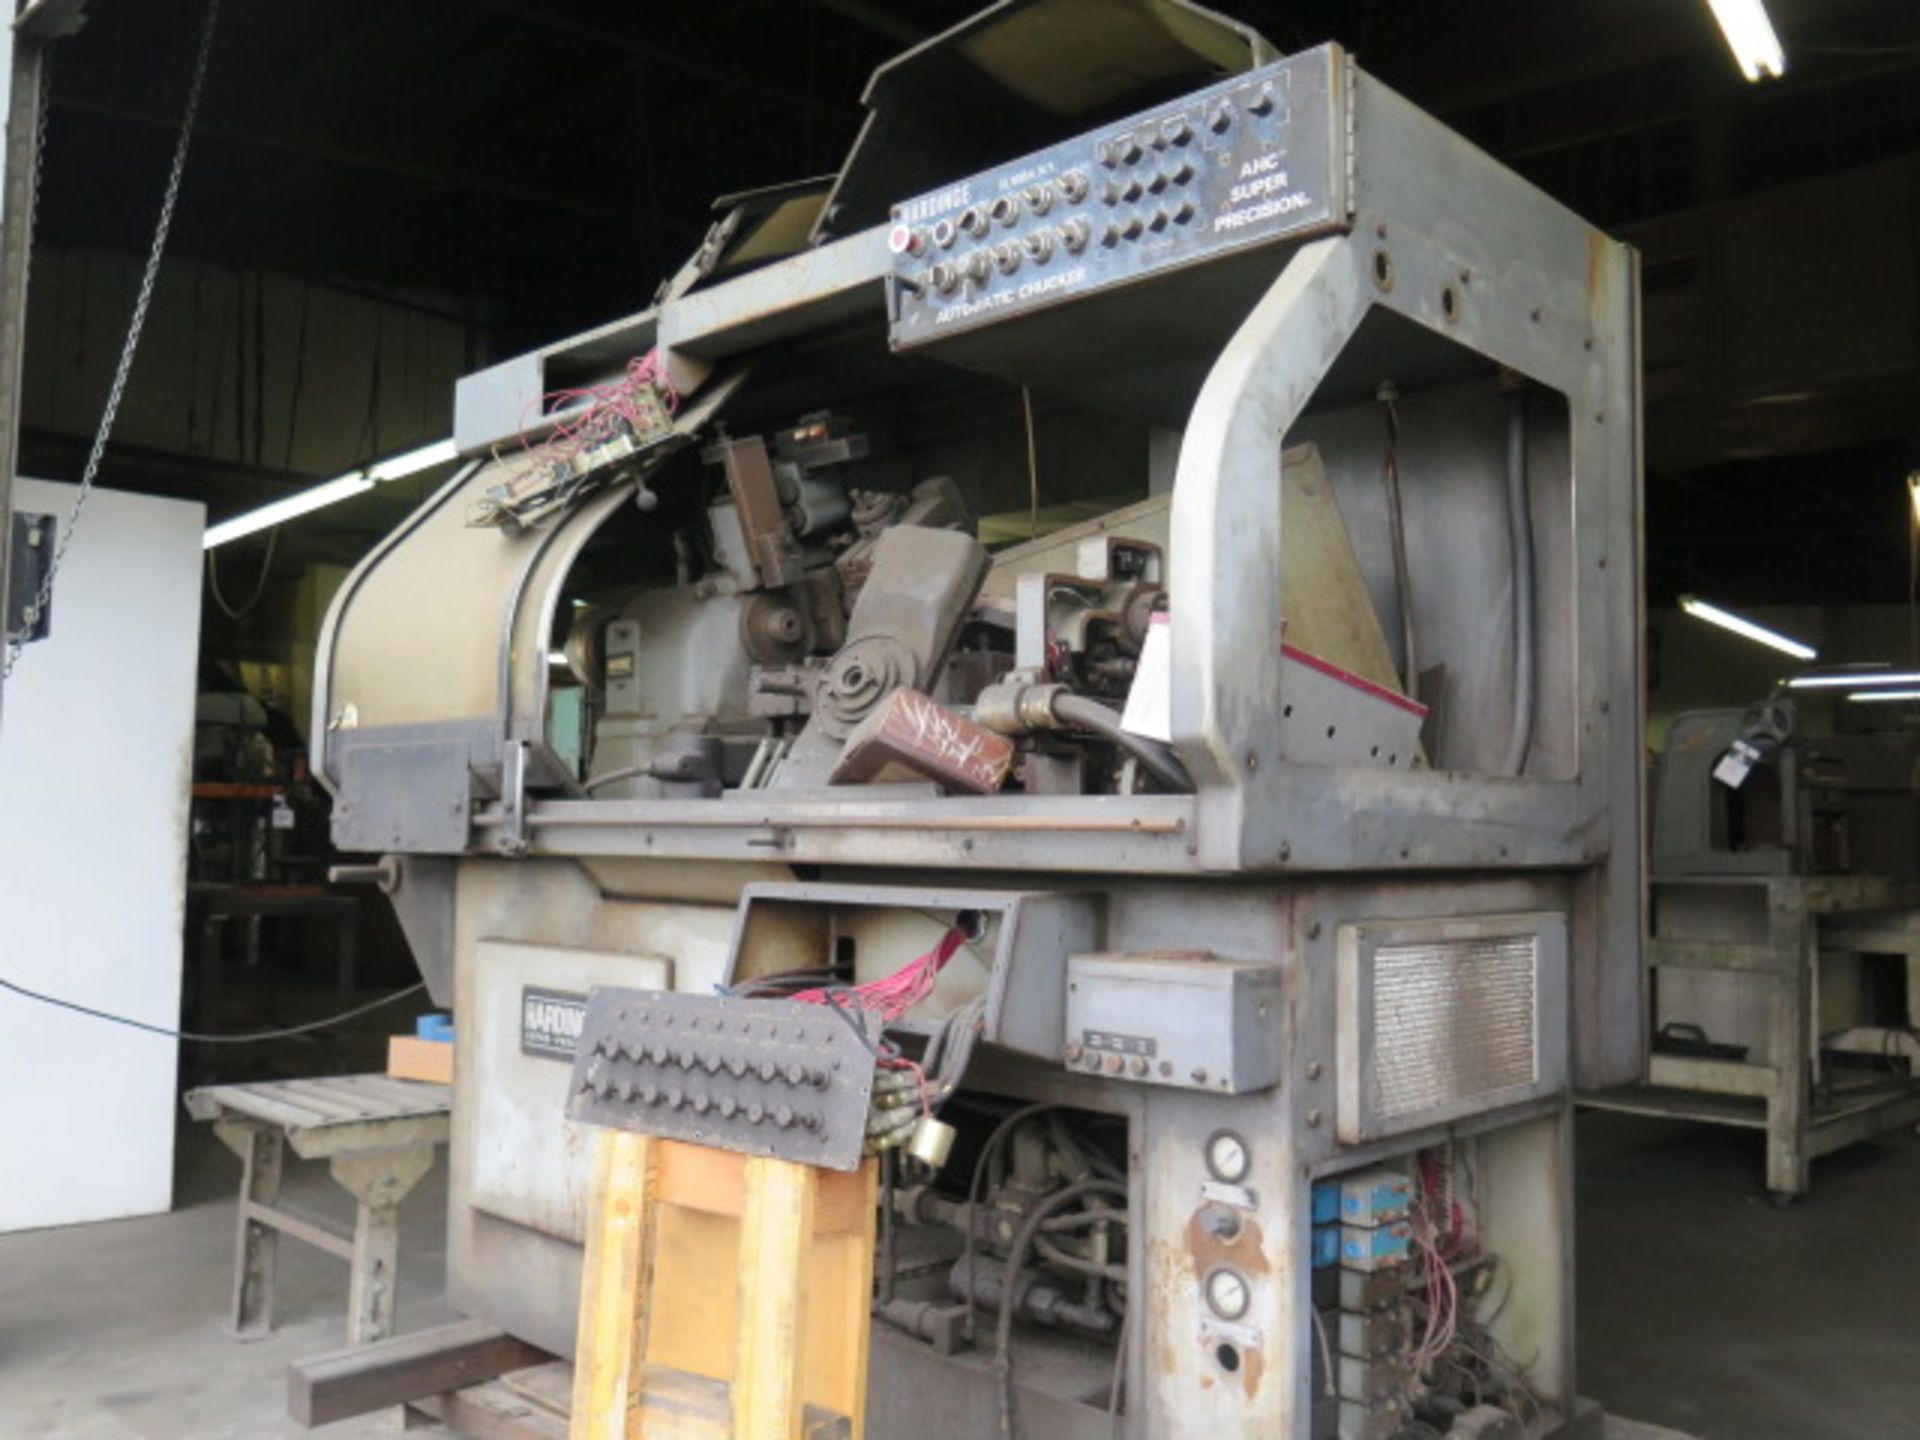 Hardinge AHC Automatic Hand Chucker (FOR PARTS) w/ Hardinge Controls, 8-Station Turret, SOLD AS IS - Image 2 of 6